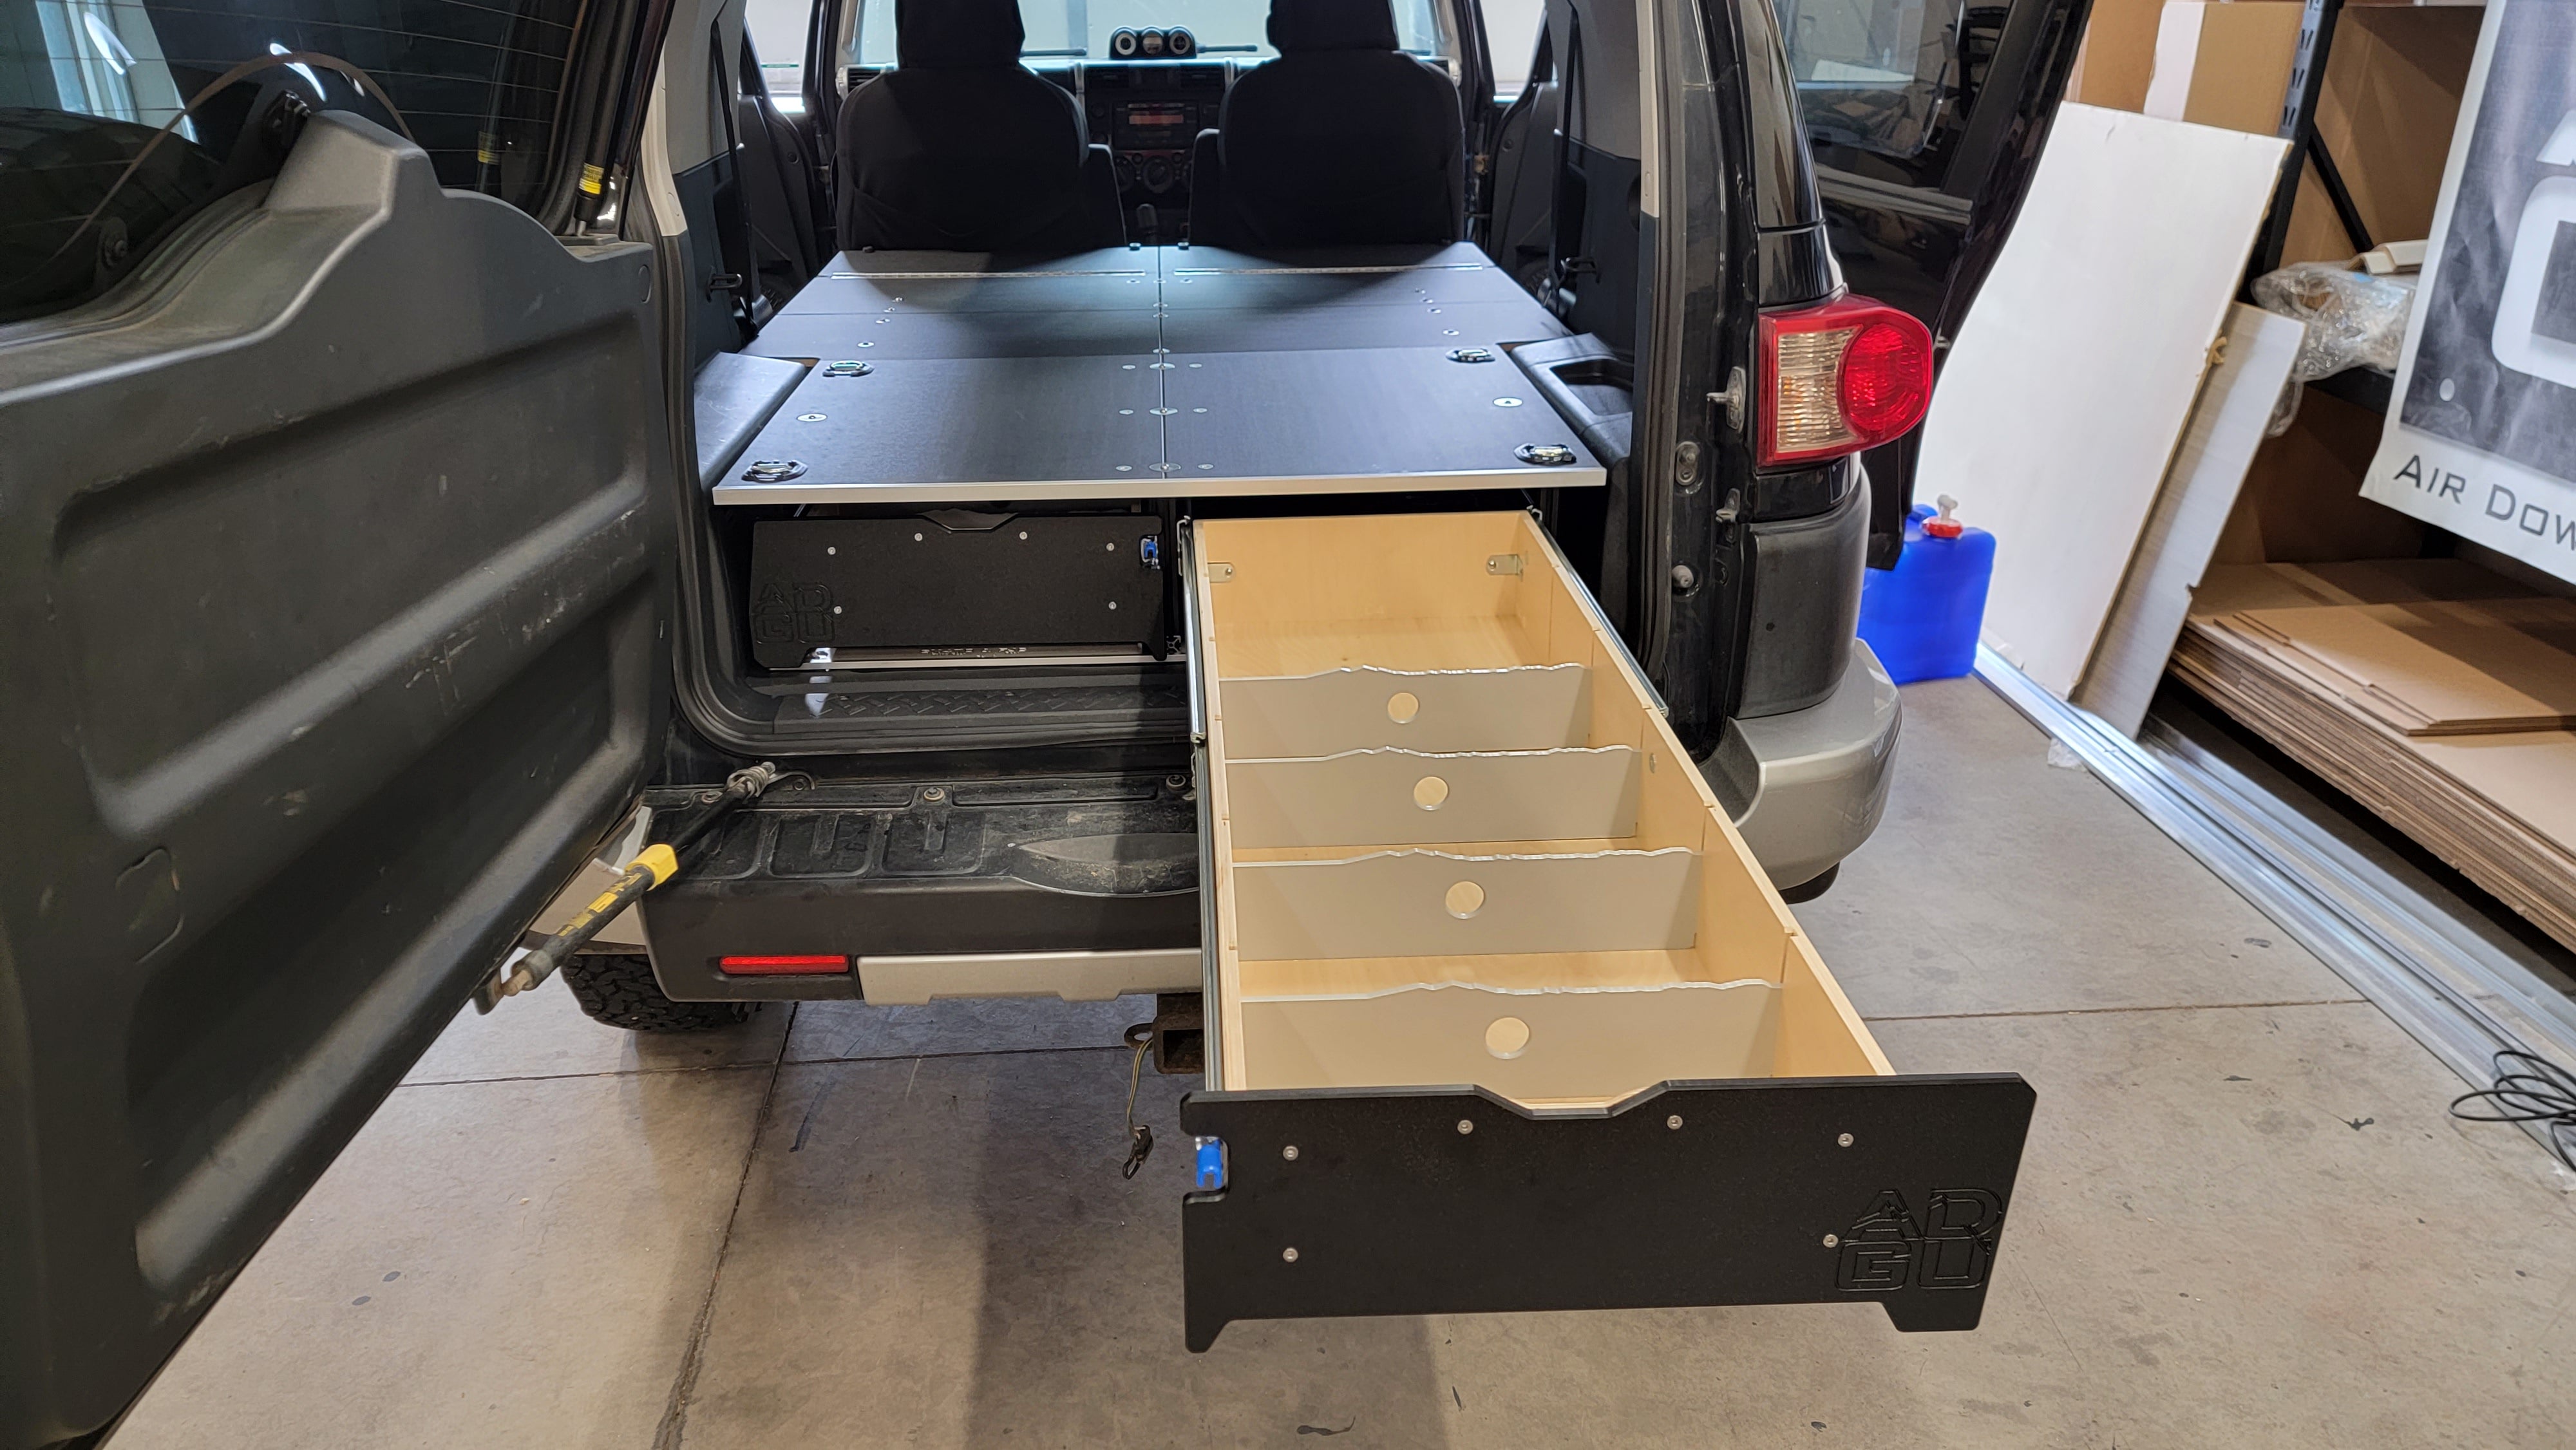 Toyota FJ Cruiser  drawer system with sleeping platform for vehicle organization perfect for overland travel.